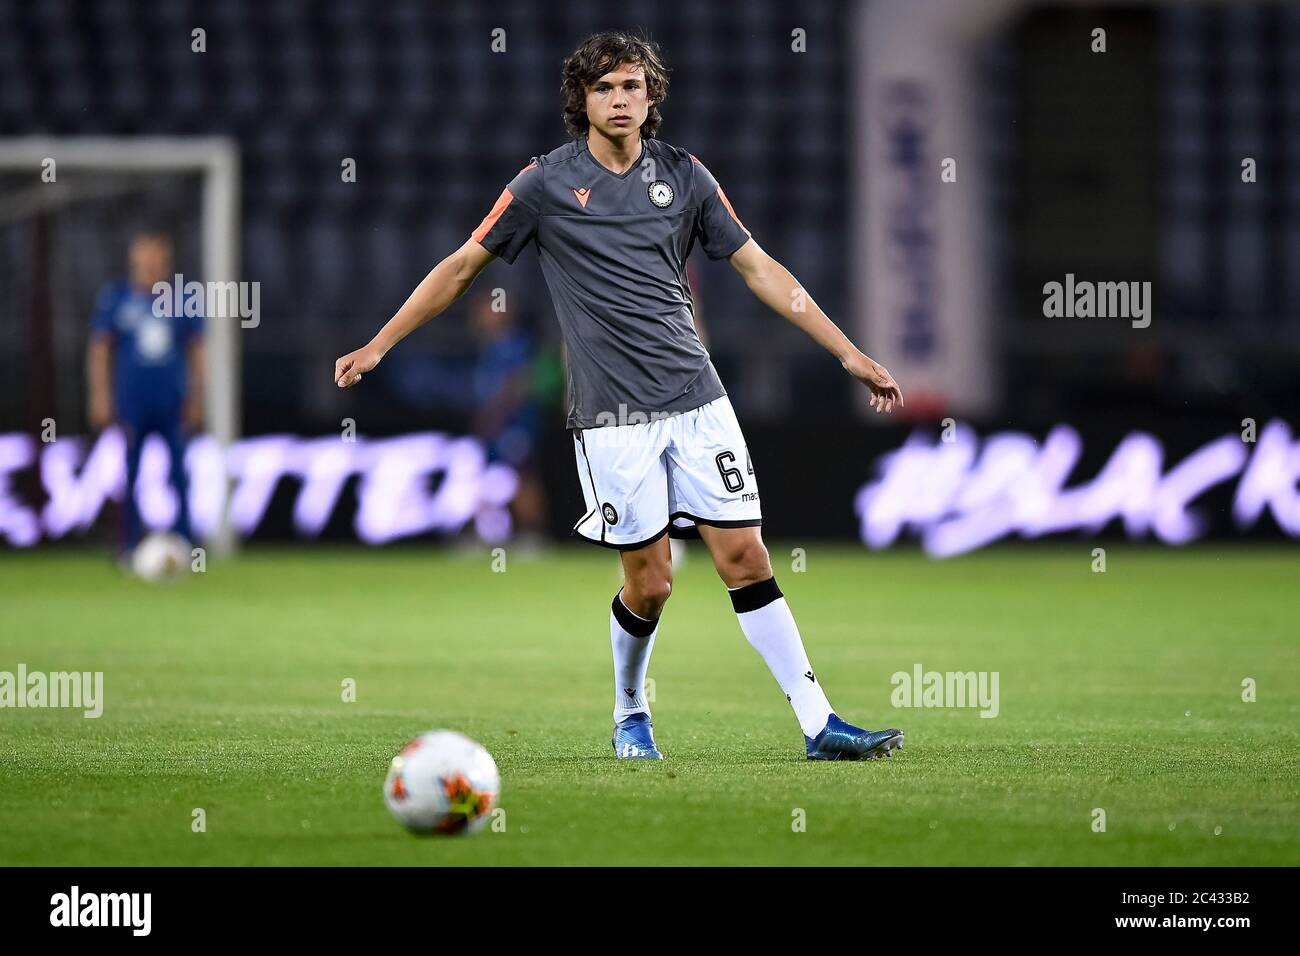 Turin, Italy. 23rd June, 2020. TURIN, ITALY - June 23, 2020: Martin Palumbo of Udinese Calcio in action during warm up prior to the Serie A football match between Torino FC and Udinese Calcio. (Photo by Nicolò Campo/Sipa USA) Credit: Sipa USA/Alamy Live News Stock Photo